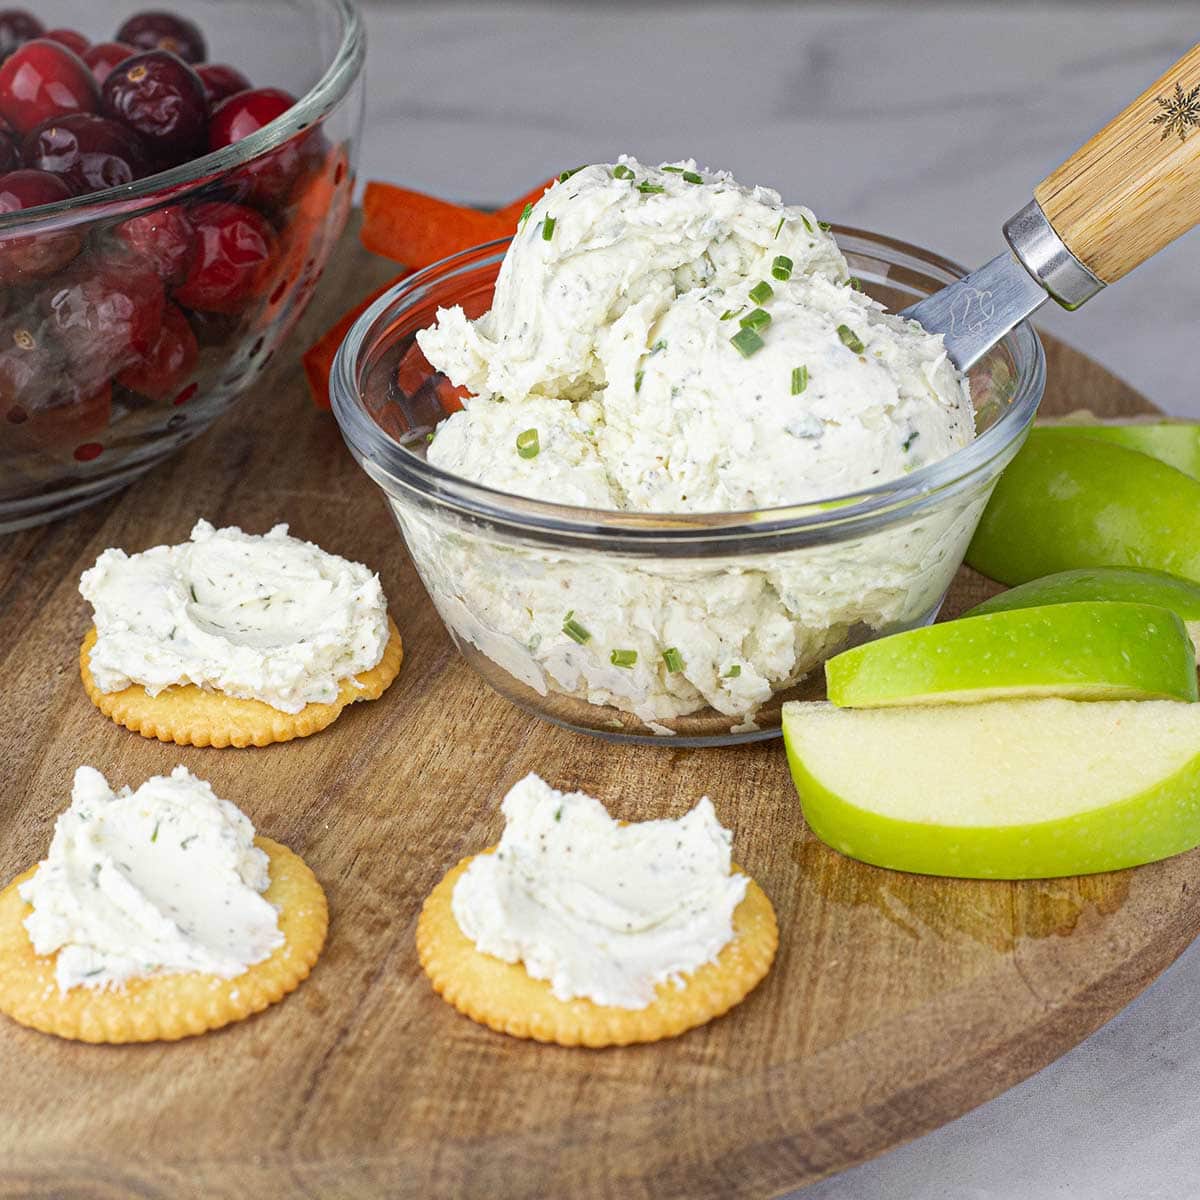 Garlic & Herb Spread in a bowl next to apples and crackers with the spread on them.